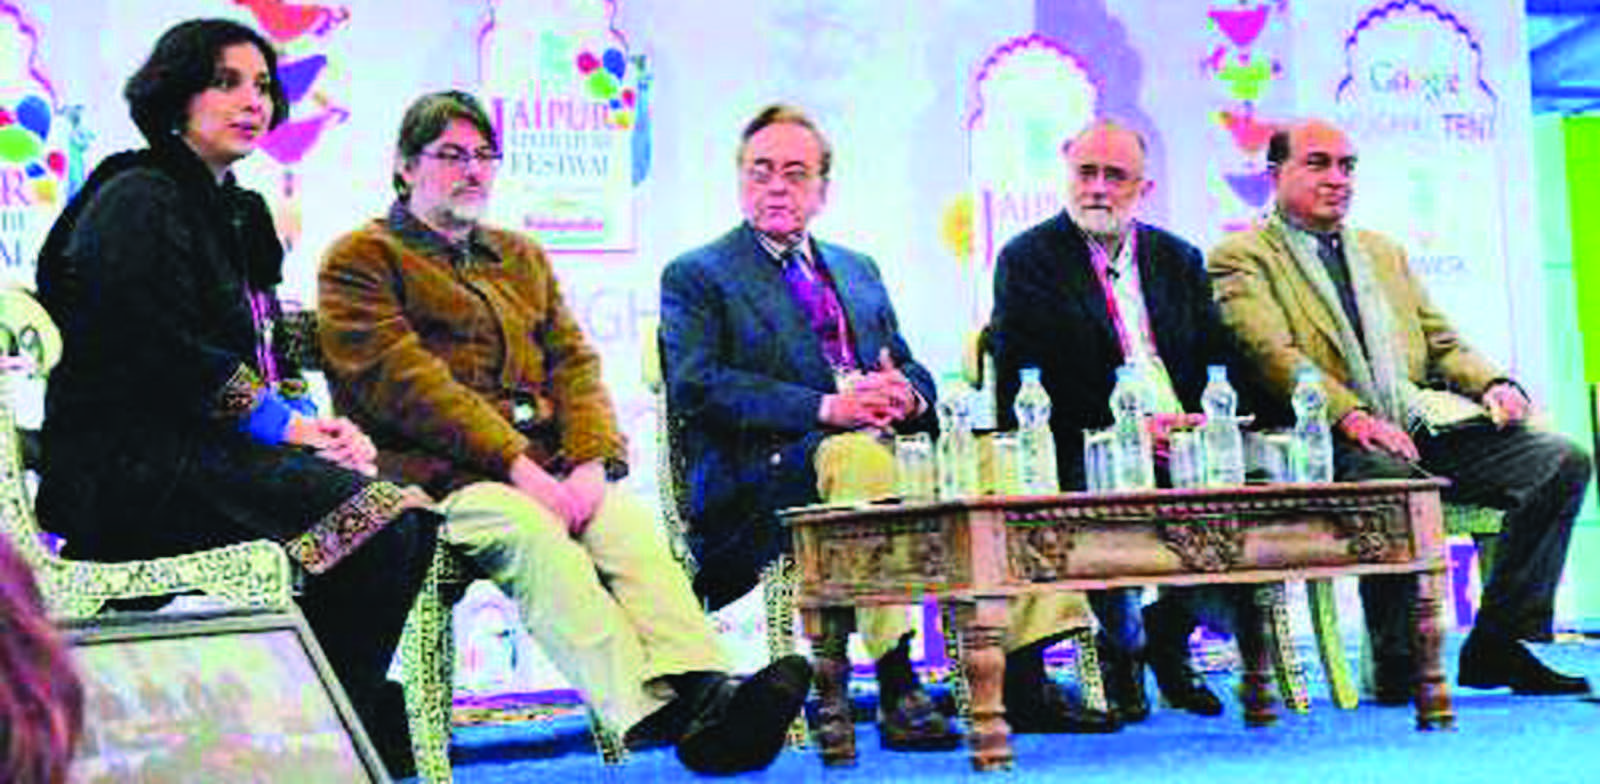 Why not talk to each other?: From right: G Parthasarathy, Anatol Lieven, Khurshid Mahmud Kasuri & Ahmed Rashid, at a session on Pakistan moderated by (extreme left) Suhasini Haider at iconic Jaipur literary festival. Photo courtesy/ PTI